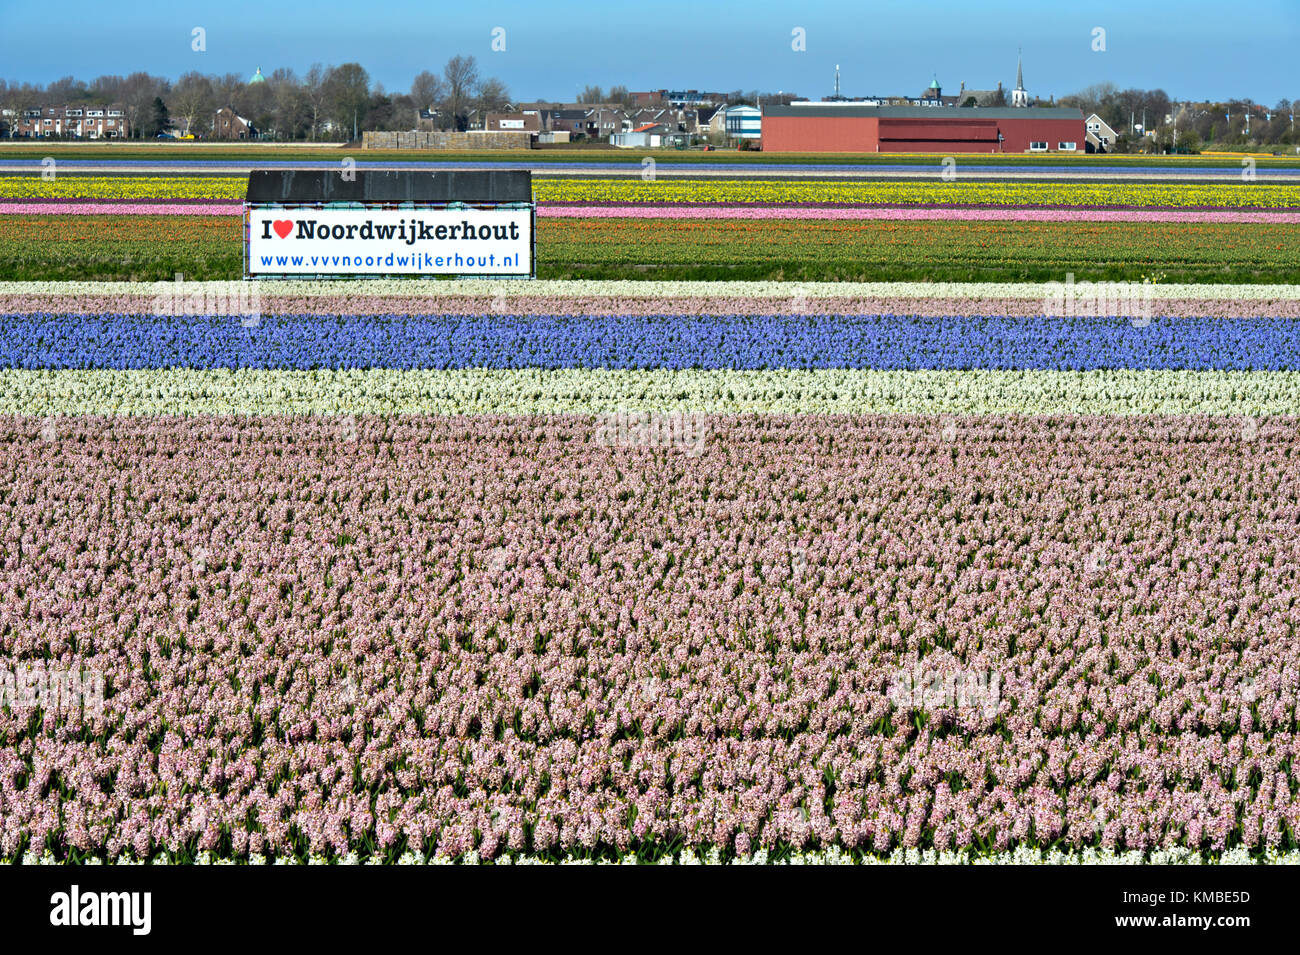 Filed of blossoming hyacinths and a poster with the words I love Noordwijkerhout, Noordwijkerhout, Netherlands Stock Photo